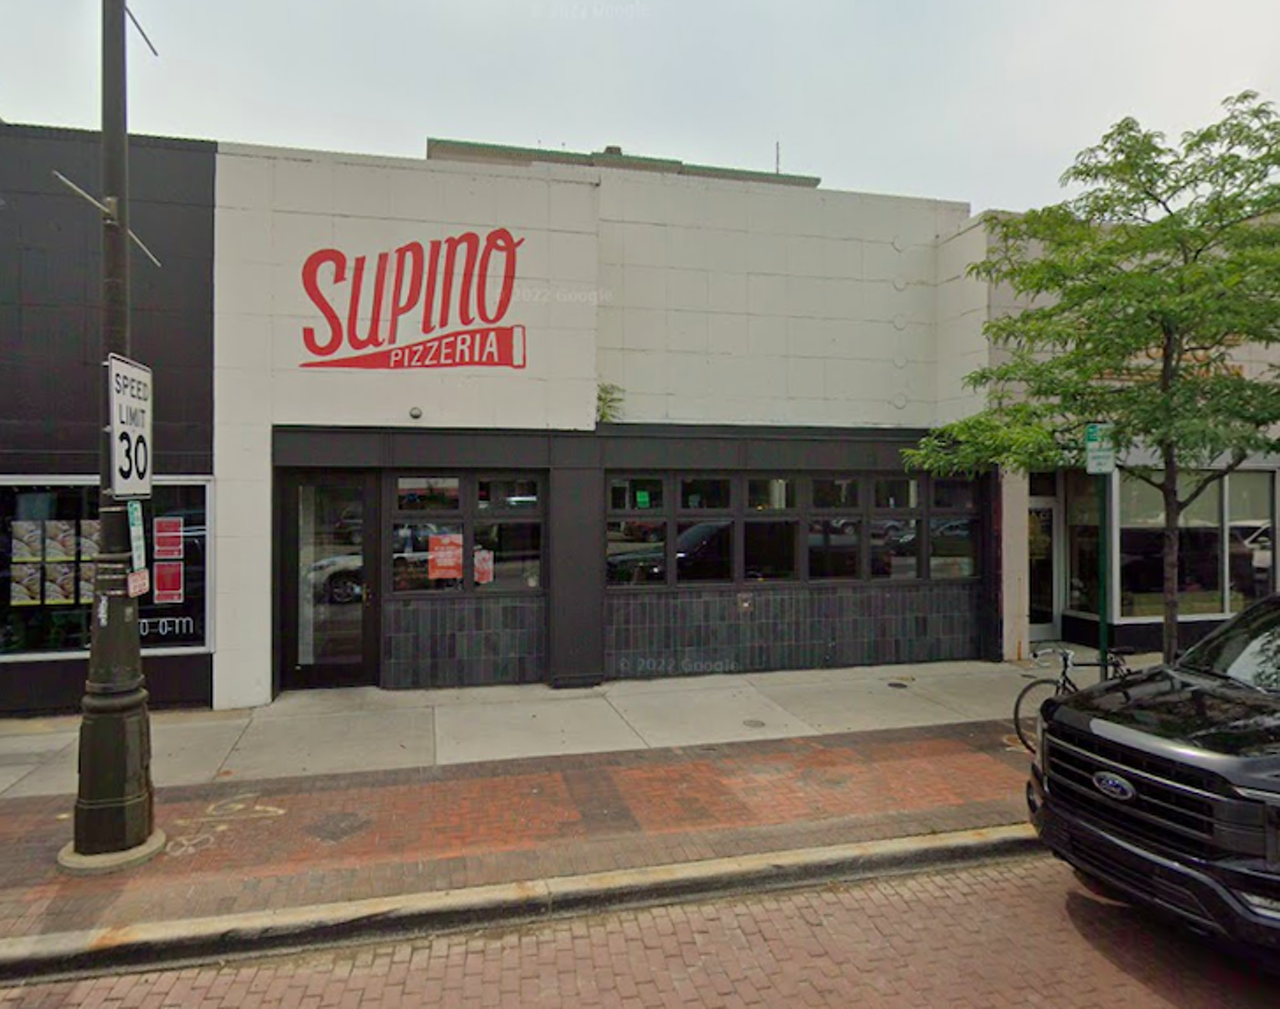 Supino Pizzeria
6519 Woodward Ave., Detroit;  | 2457 Russell St., Detroit; supinopizzeria.com
“For me it’s the best pizza. It’s thin. I don’t like thick pizza. And Dave Mancini is an amazing guy. Again, he’s always there to help. And what I love from Dave is that he’s not shy to ask for help as well. He will call me if he needs anything, and I love that. It’s how Africans are. He’s such a good neighbor. It’s really not crazy expensive and they are open on Monday. If we’re working at Baobab Fare, we can grab pizza for our staff and ourselves and it’s always so good.”